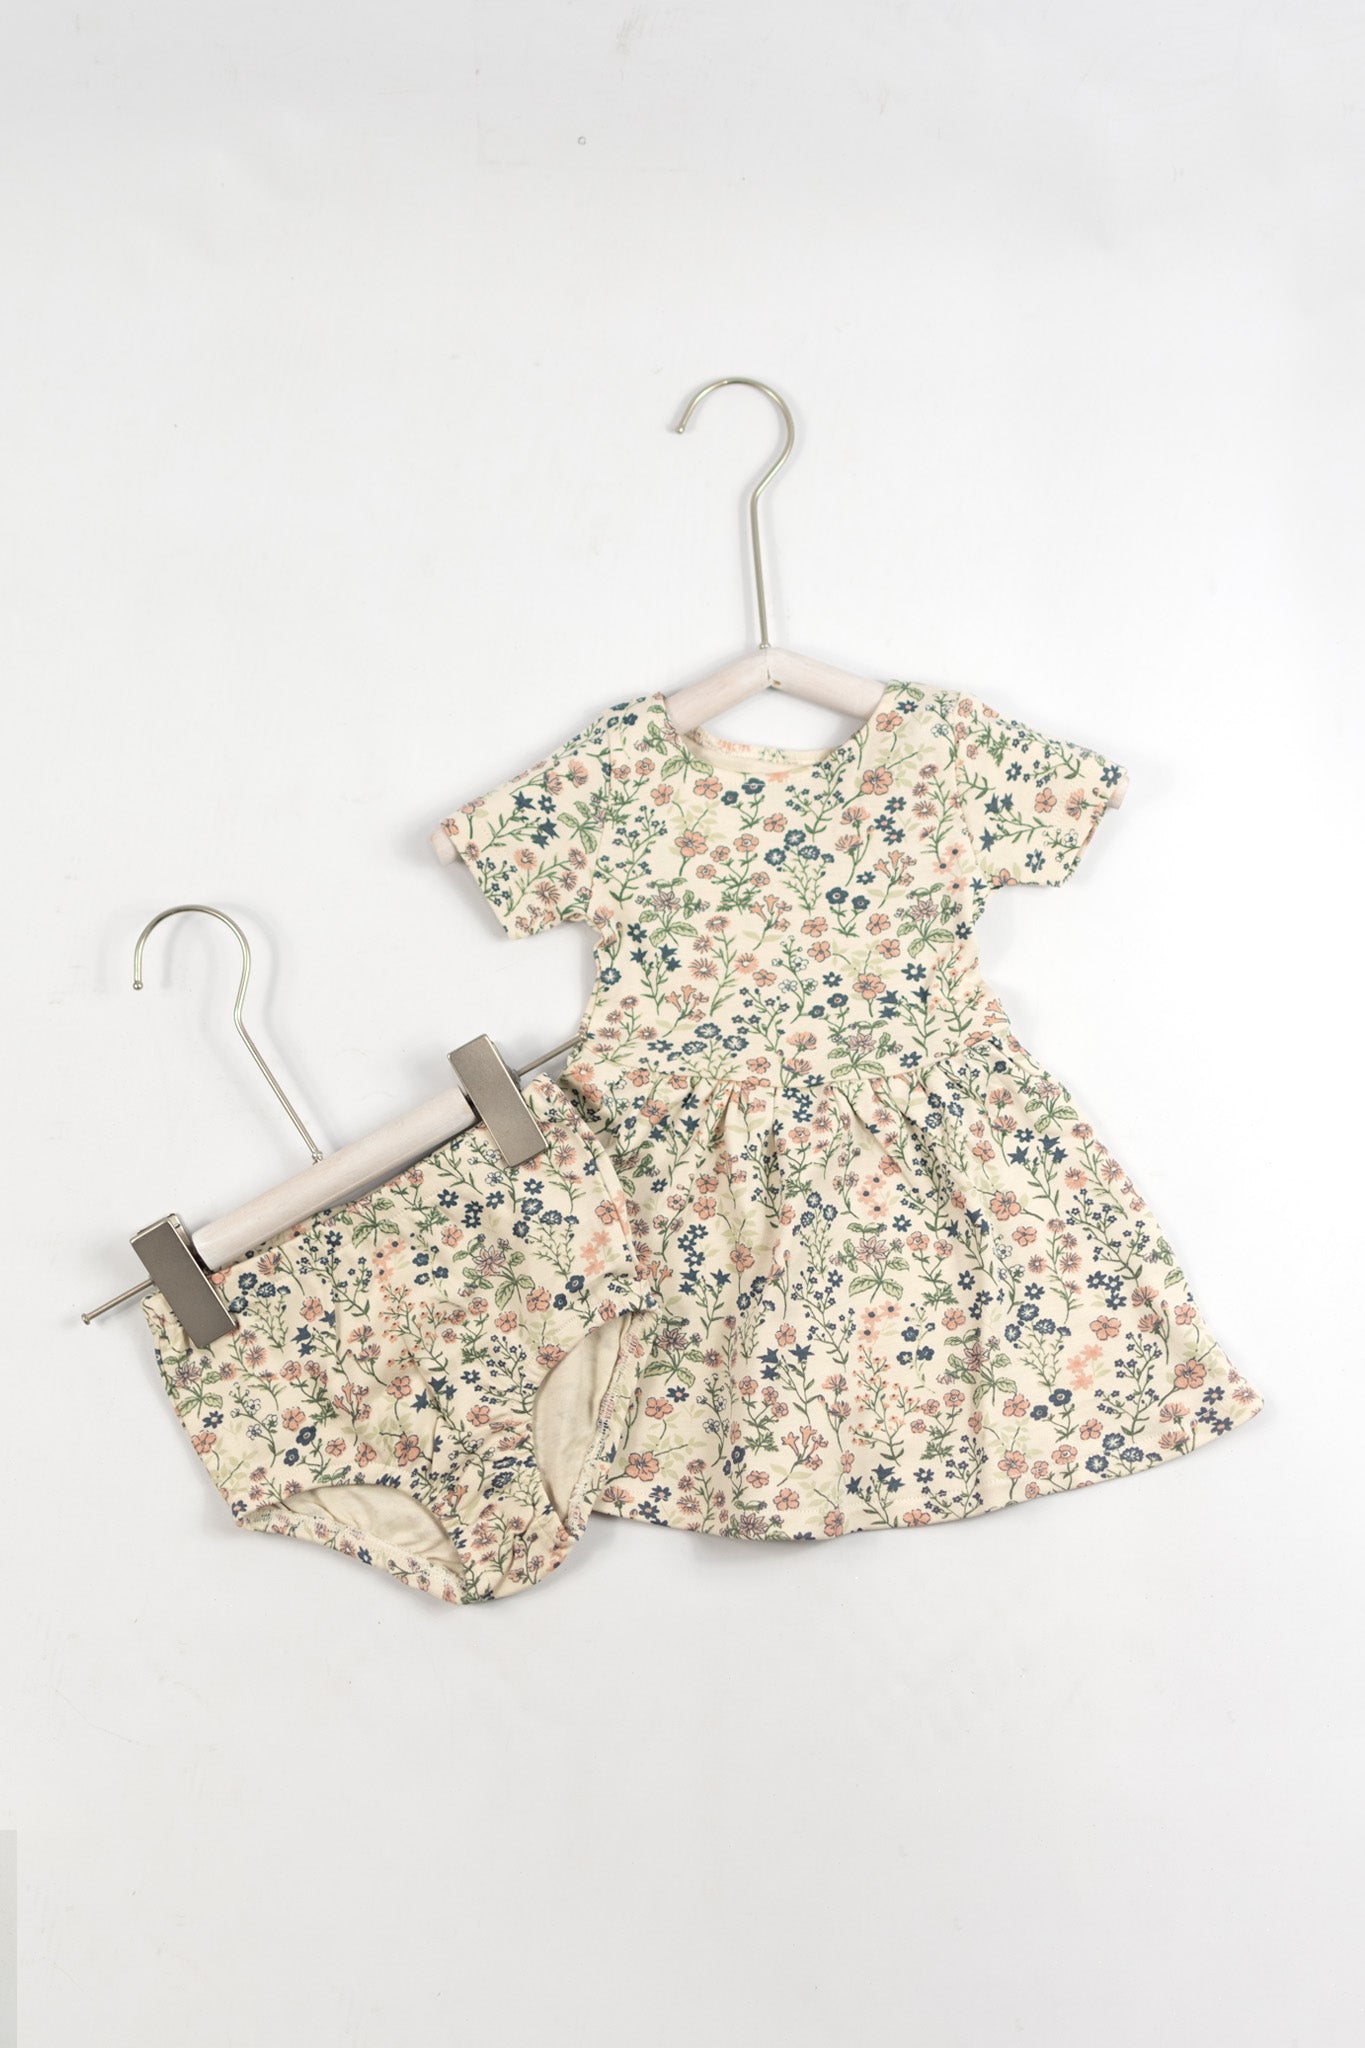 Colored Organics Meadow Floral Swing Dress